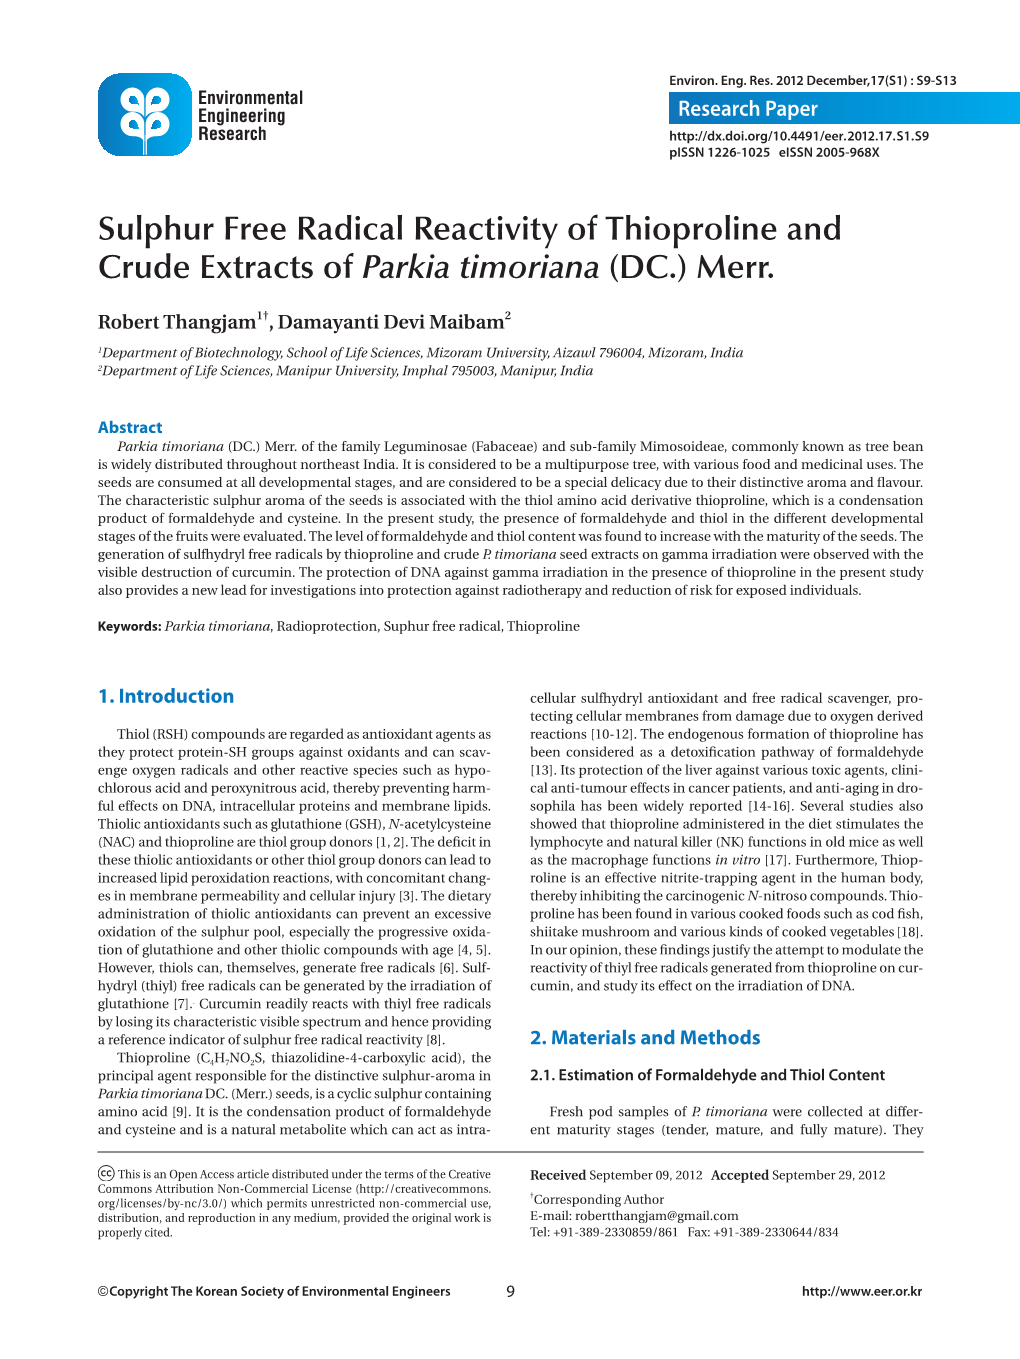 Sulphur Free Radical Reactivity of Thioproline and Crude Extracts of Parkia Timoriana (DC.) Merr